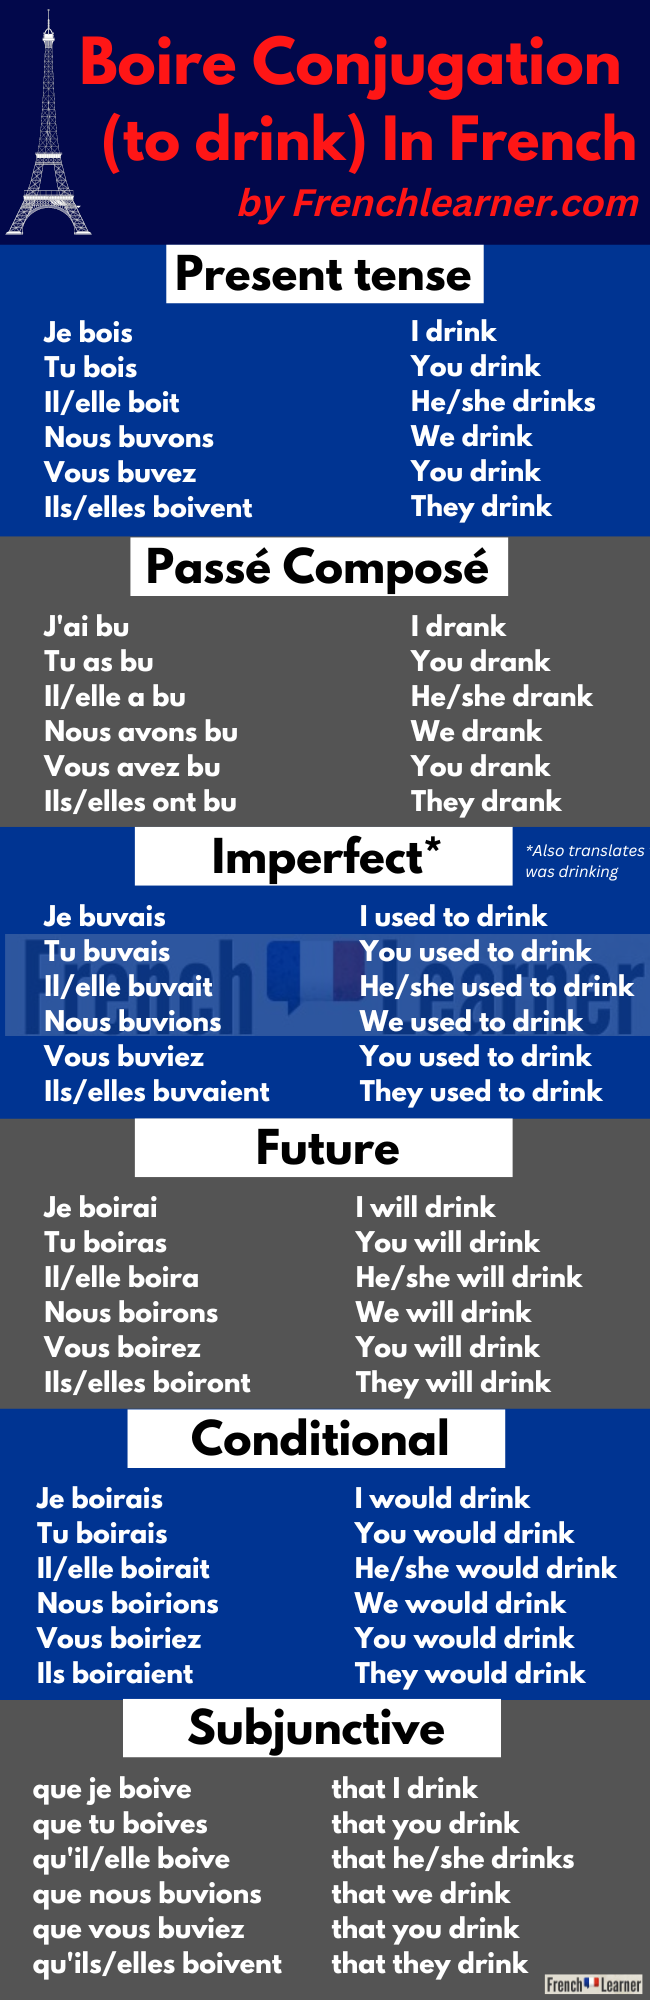 Boire Conjugation: How To Conjugate “To Drink” In French